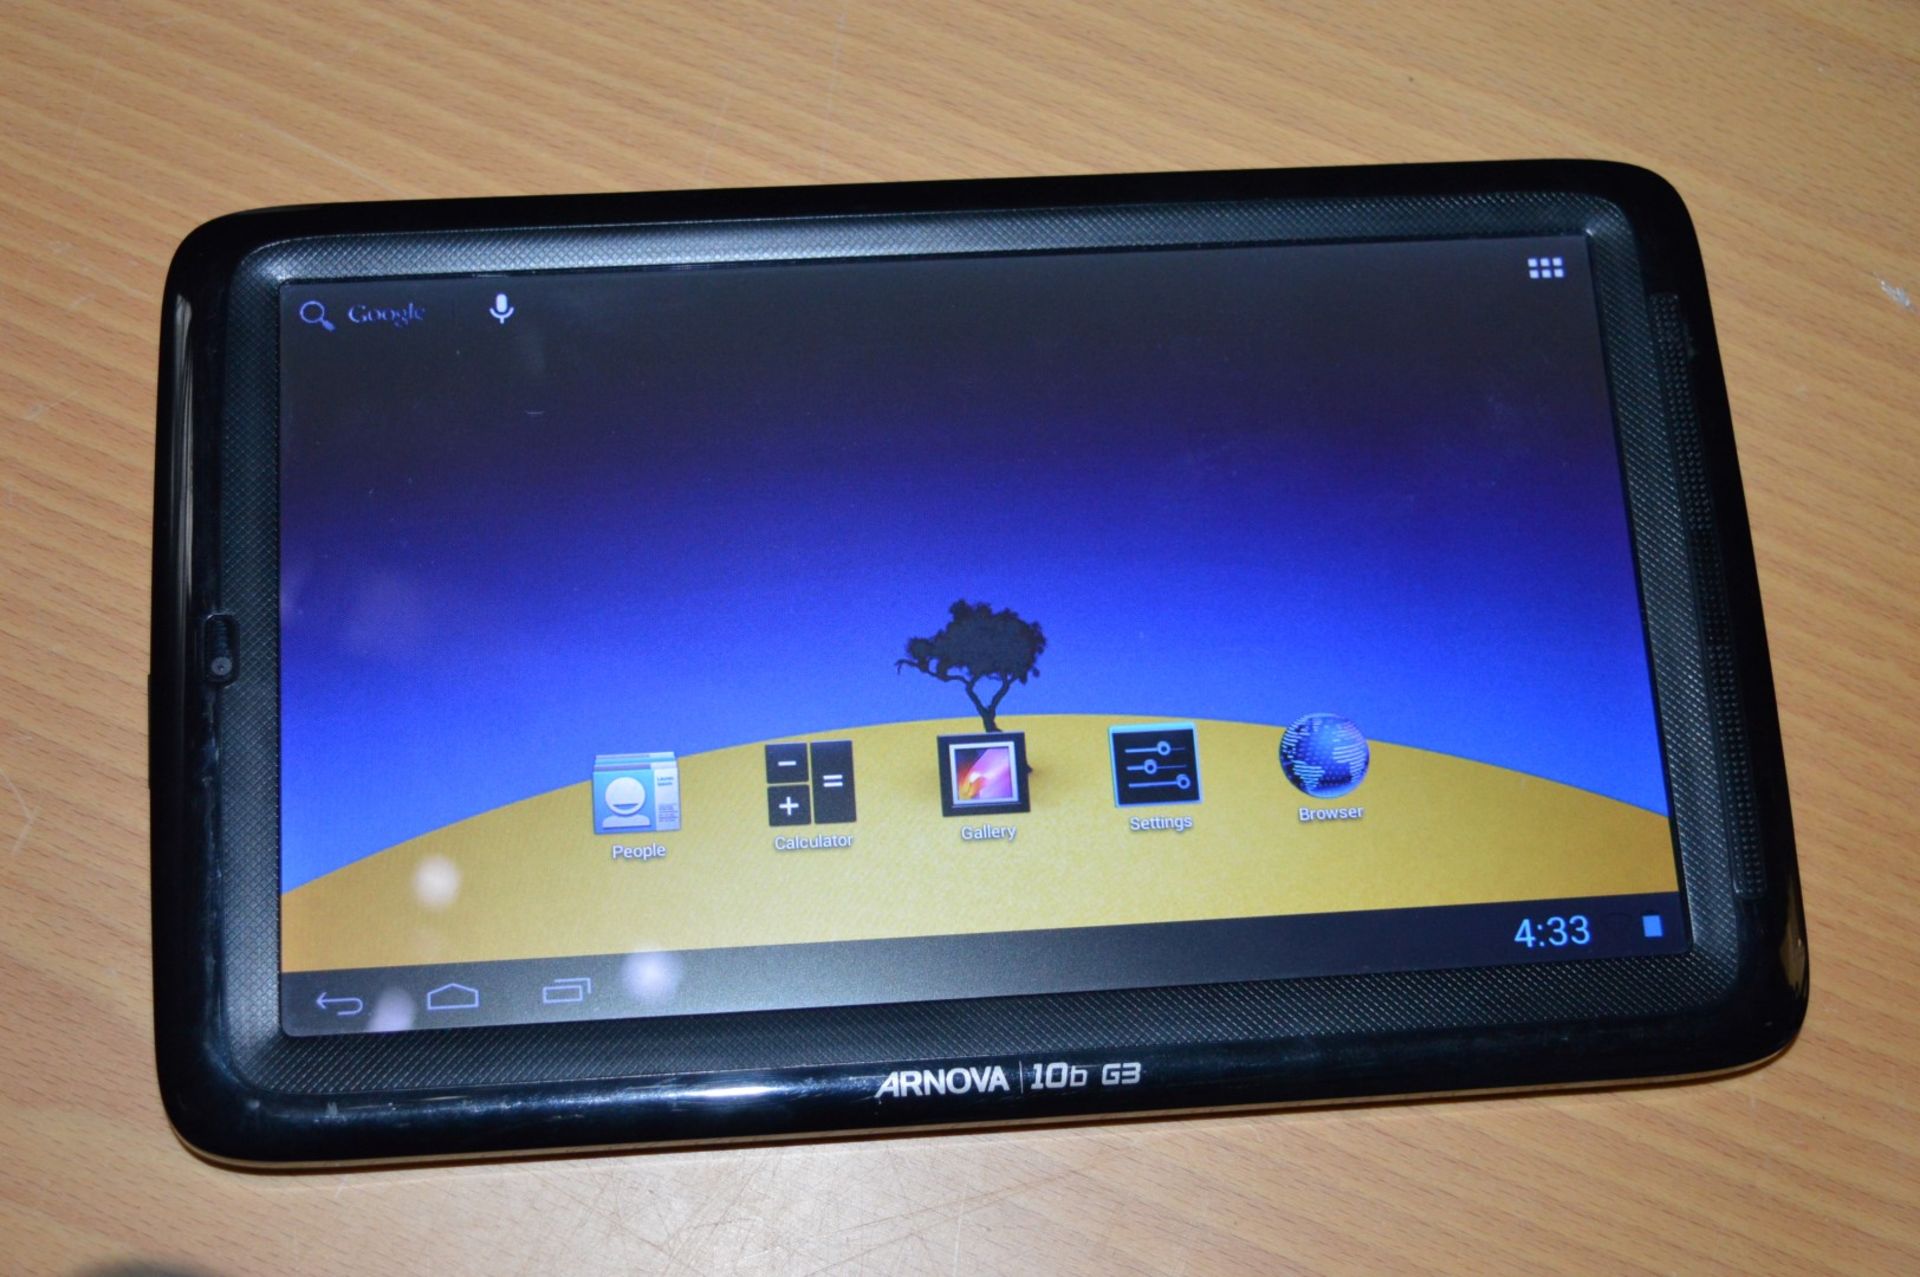 1 x Arnova 10b G3 10.1 Inch Tablet Computer - Features Android OS, 1ghz Processor,  1gb Ram, 8gb - Image 2 of 4